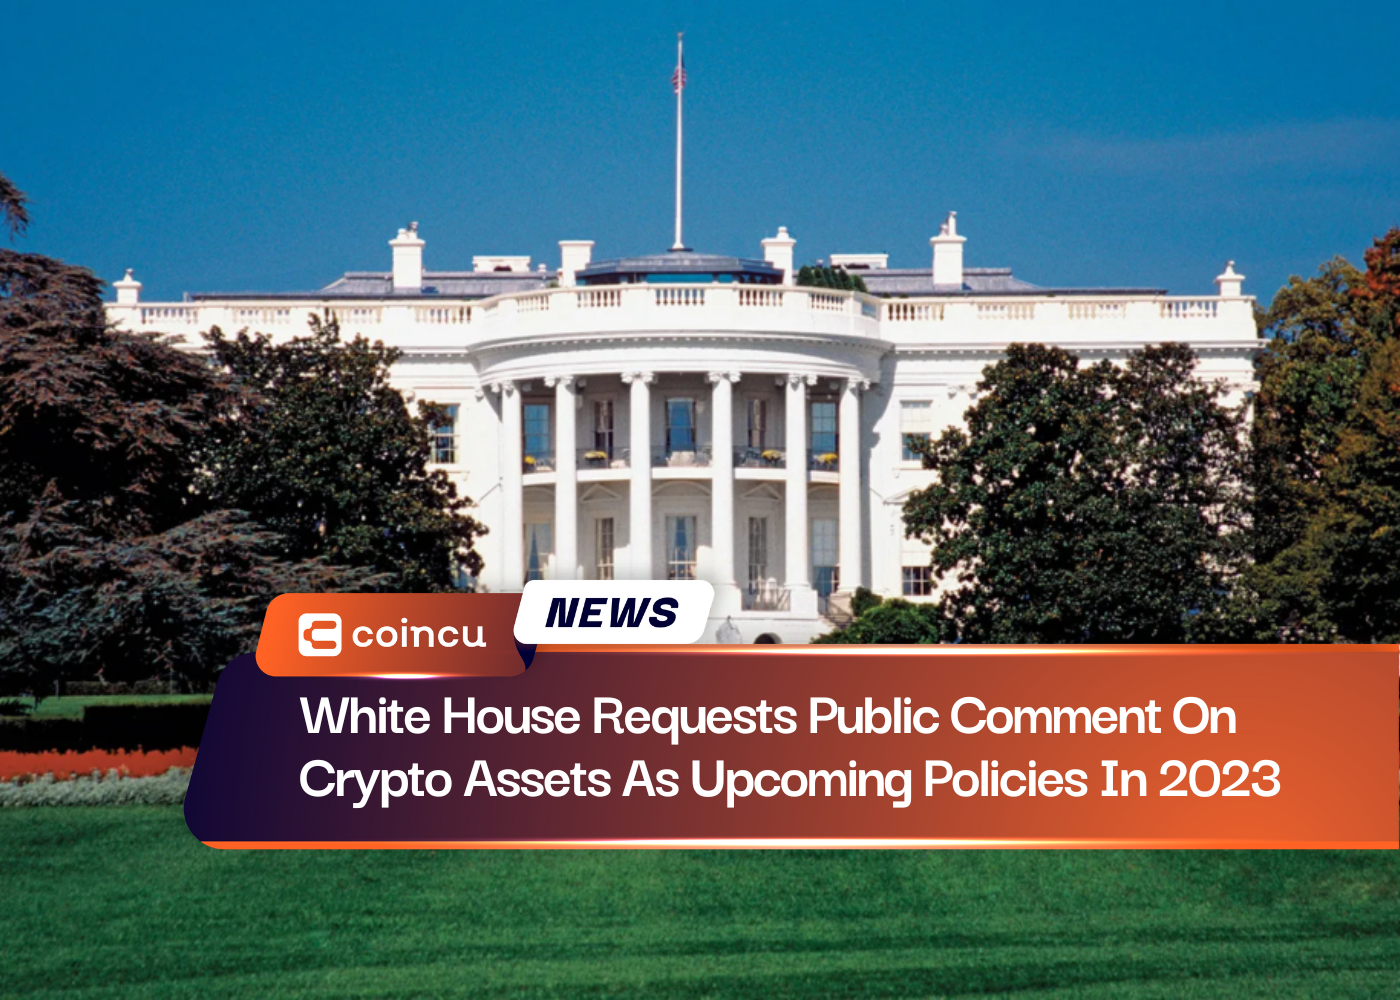 White House Requests Public Comment On Crypto Assets As Upcoming Policies In 2023